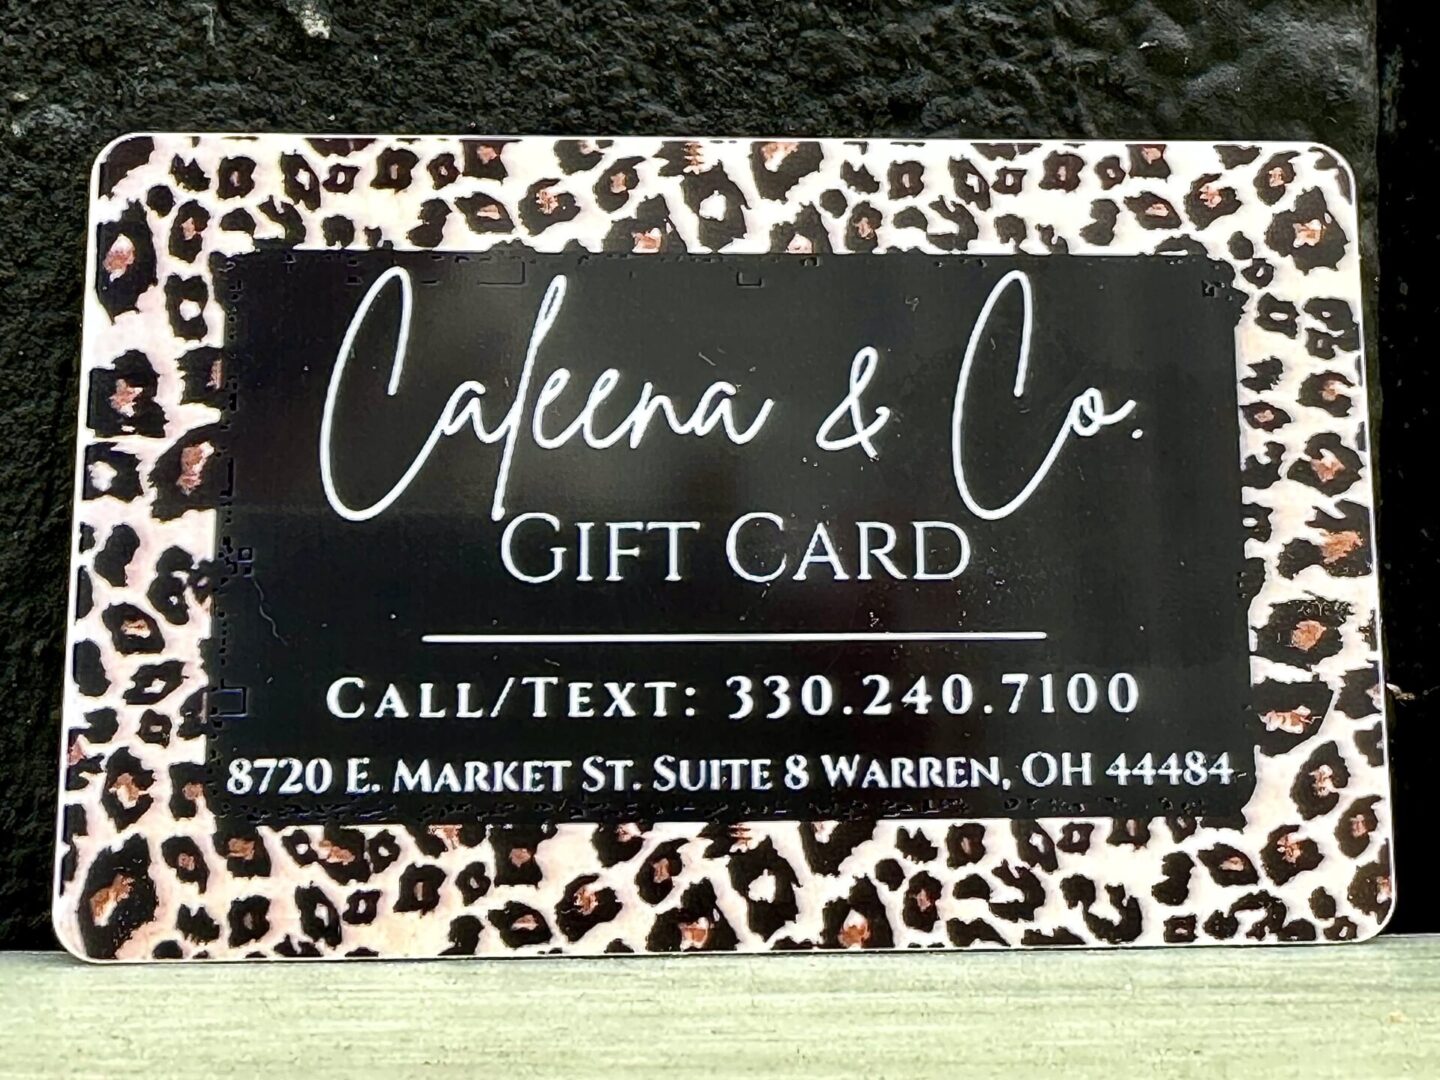 A $50 Caleena Gift Card *IN STORE use only* with a leopard print on it.